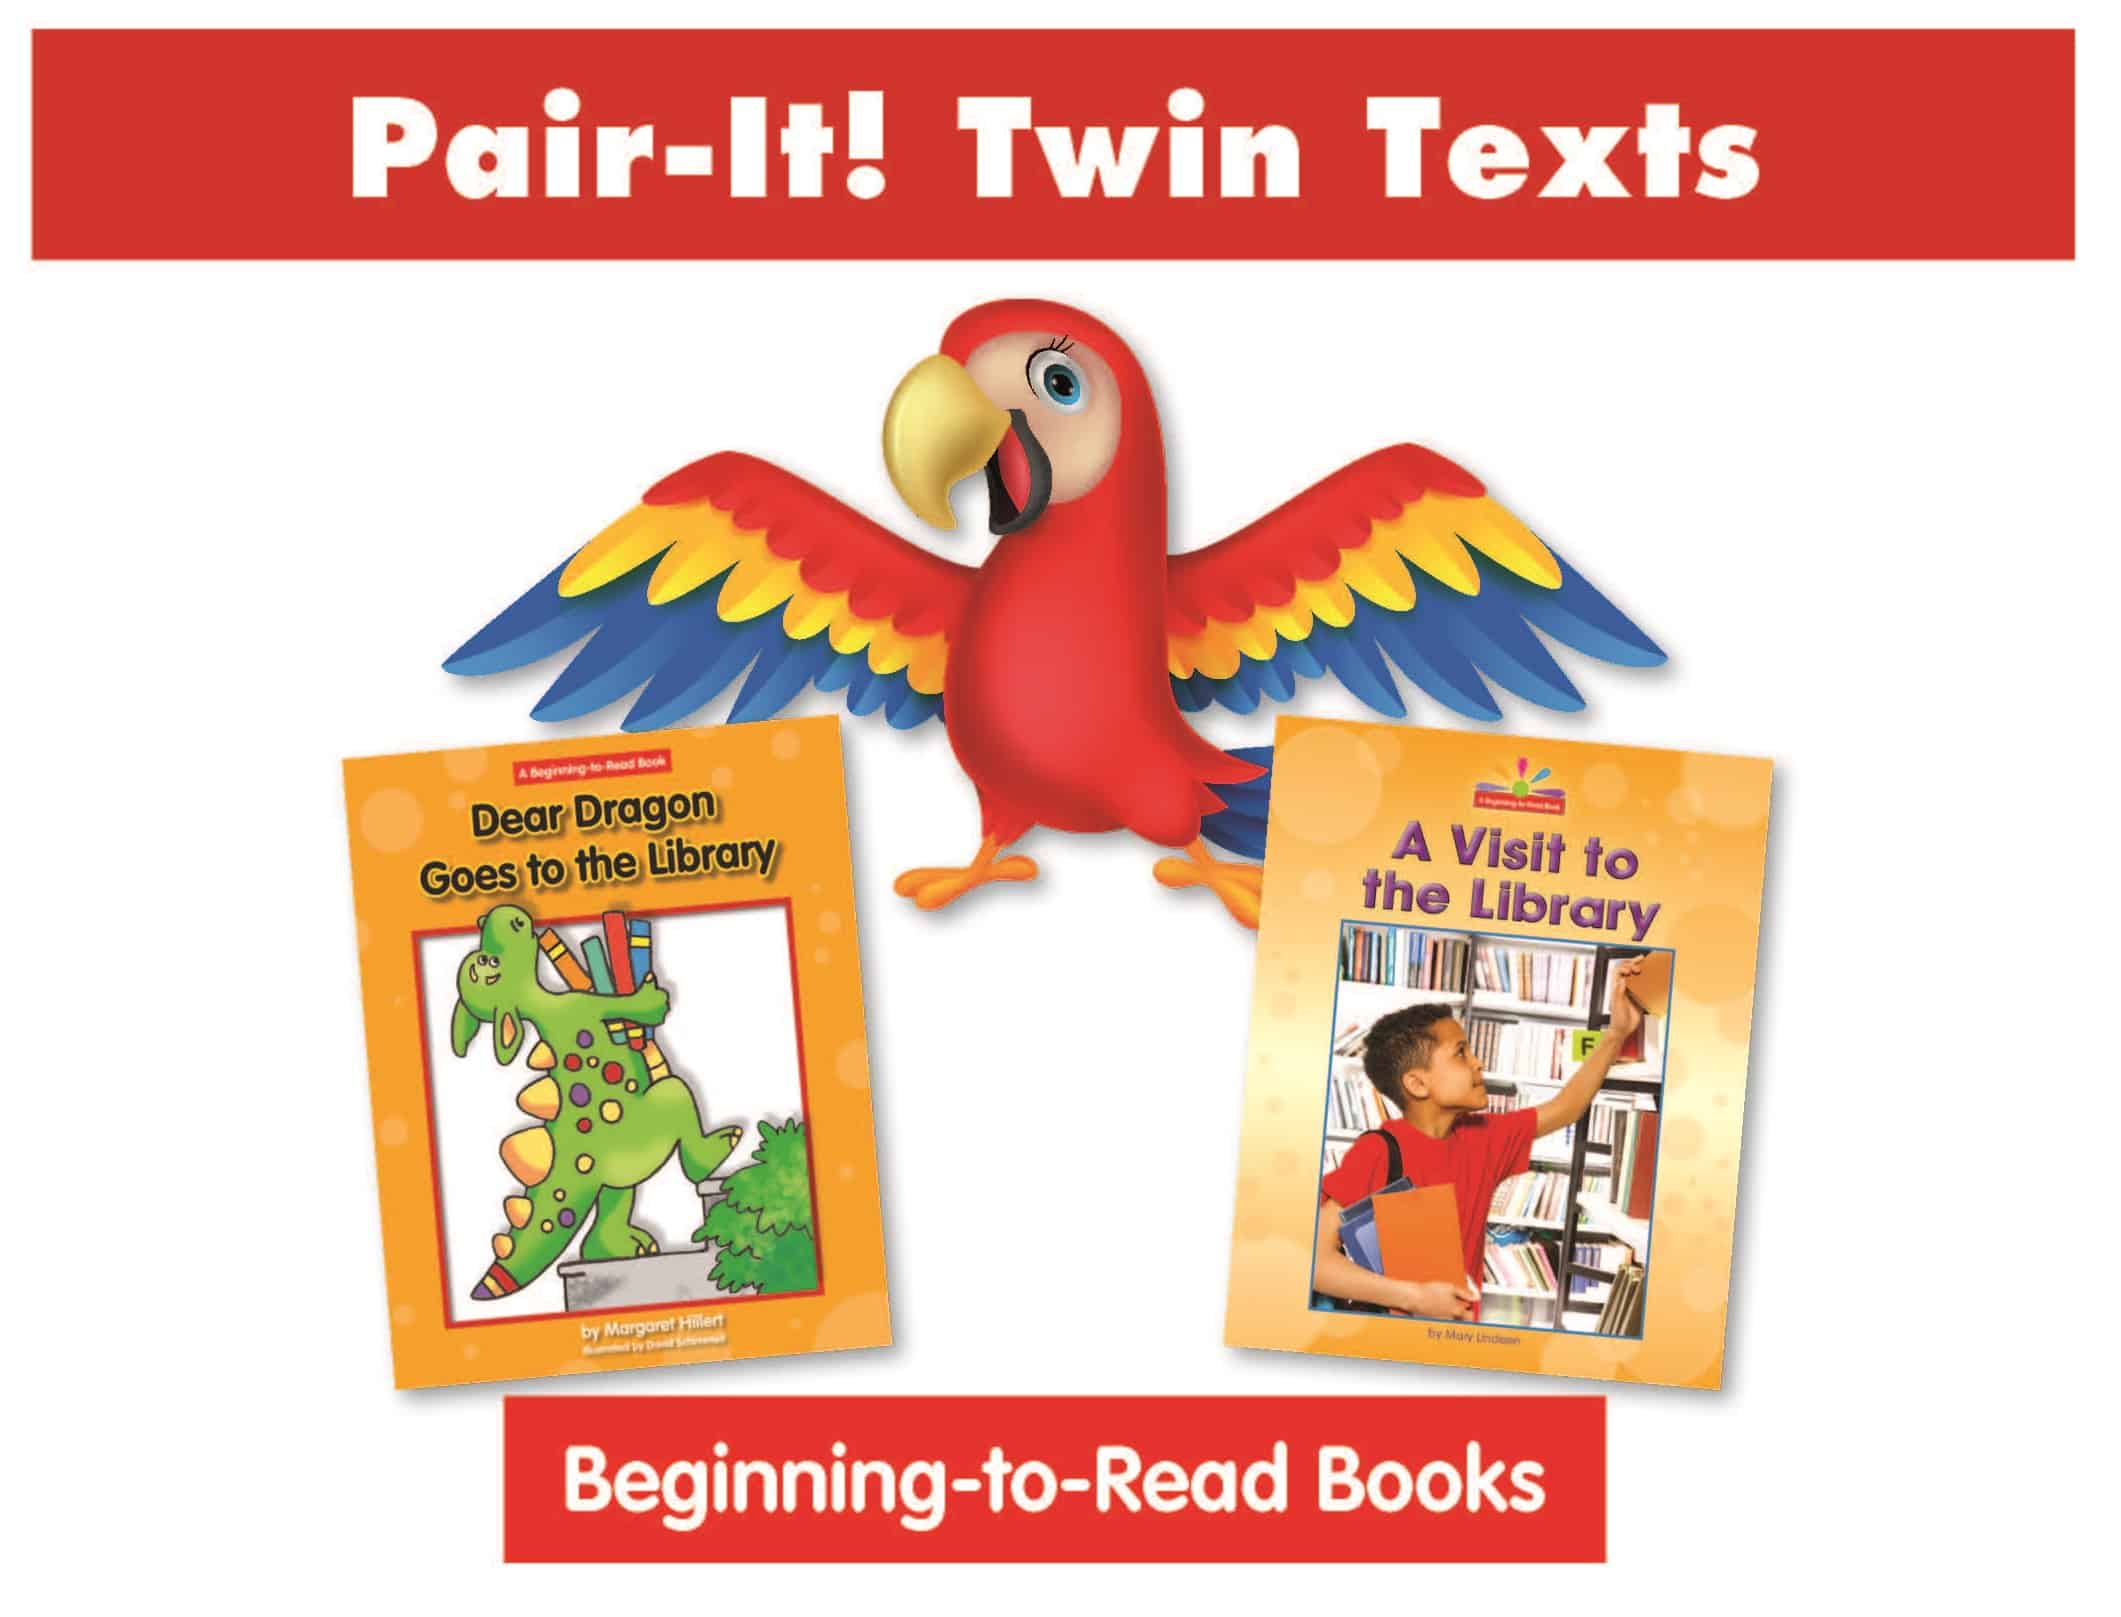 A Complete Seasons Pair-It! Twin Text Set (8 books)